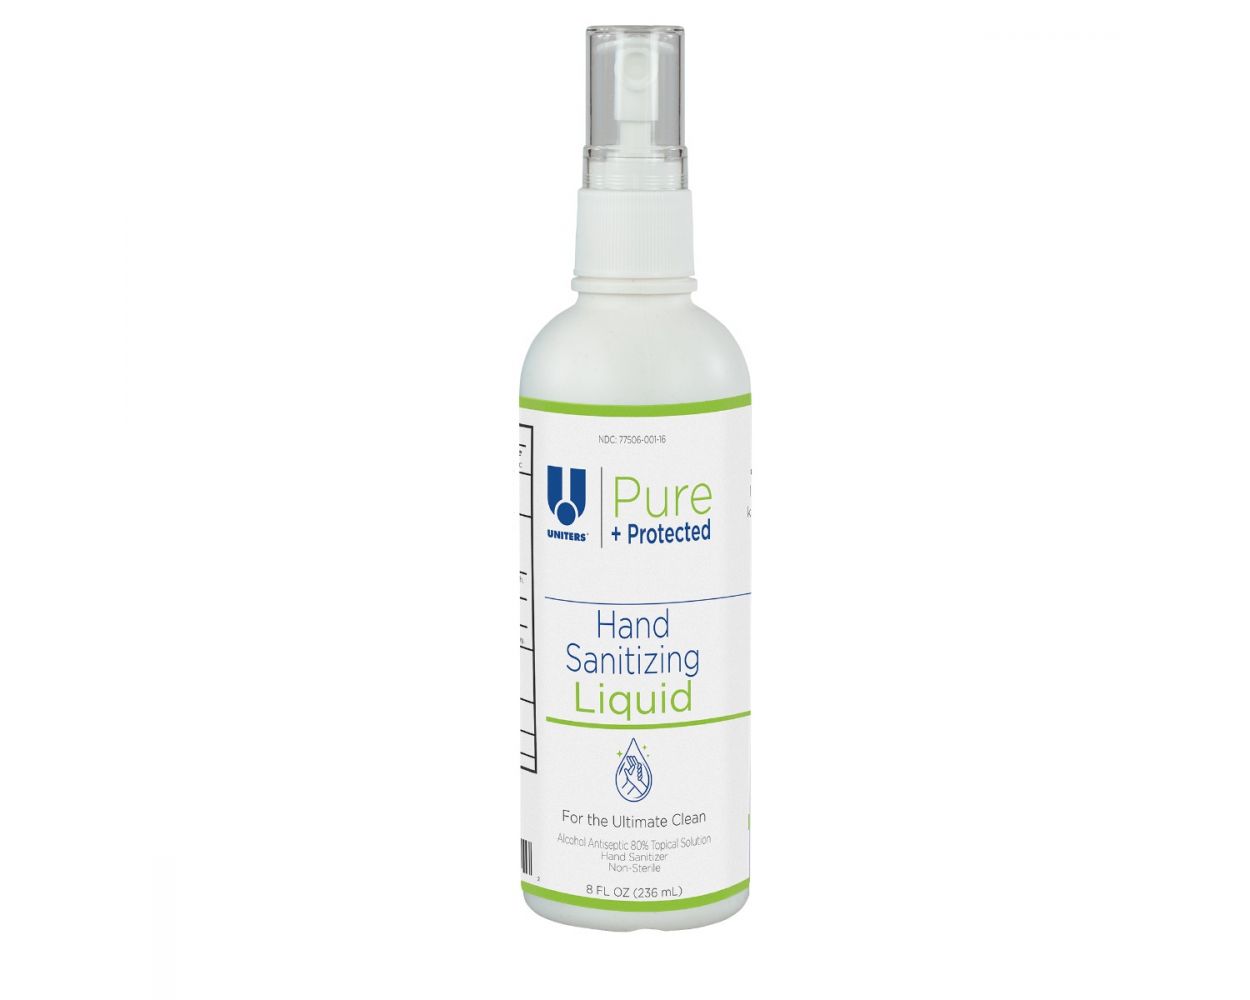 UNITERS Pure + Protected Hand Sanitizing Spray